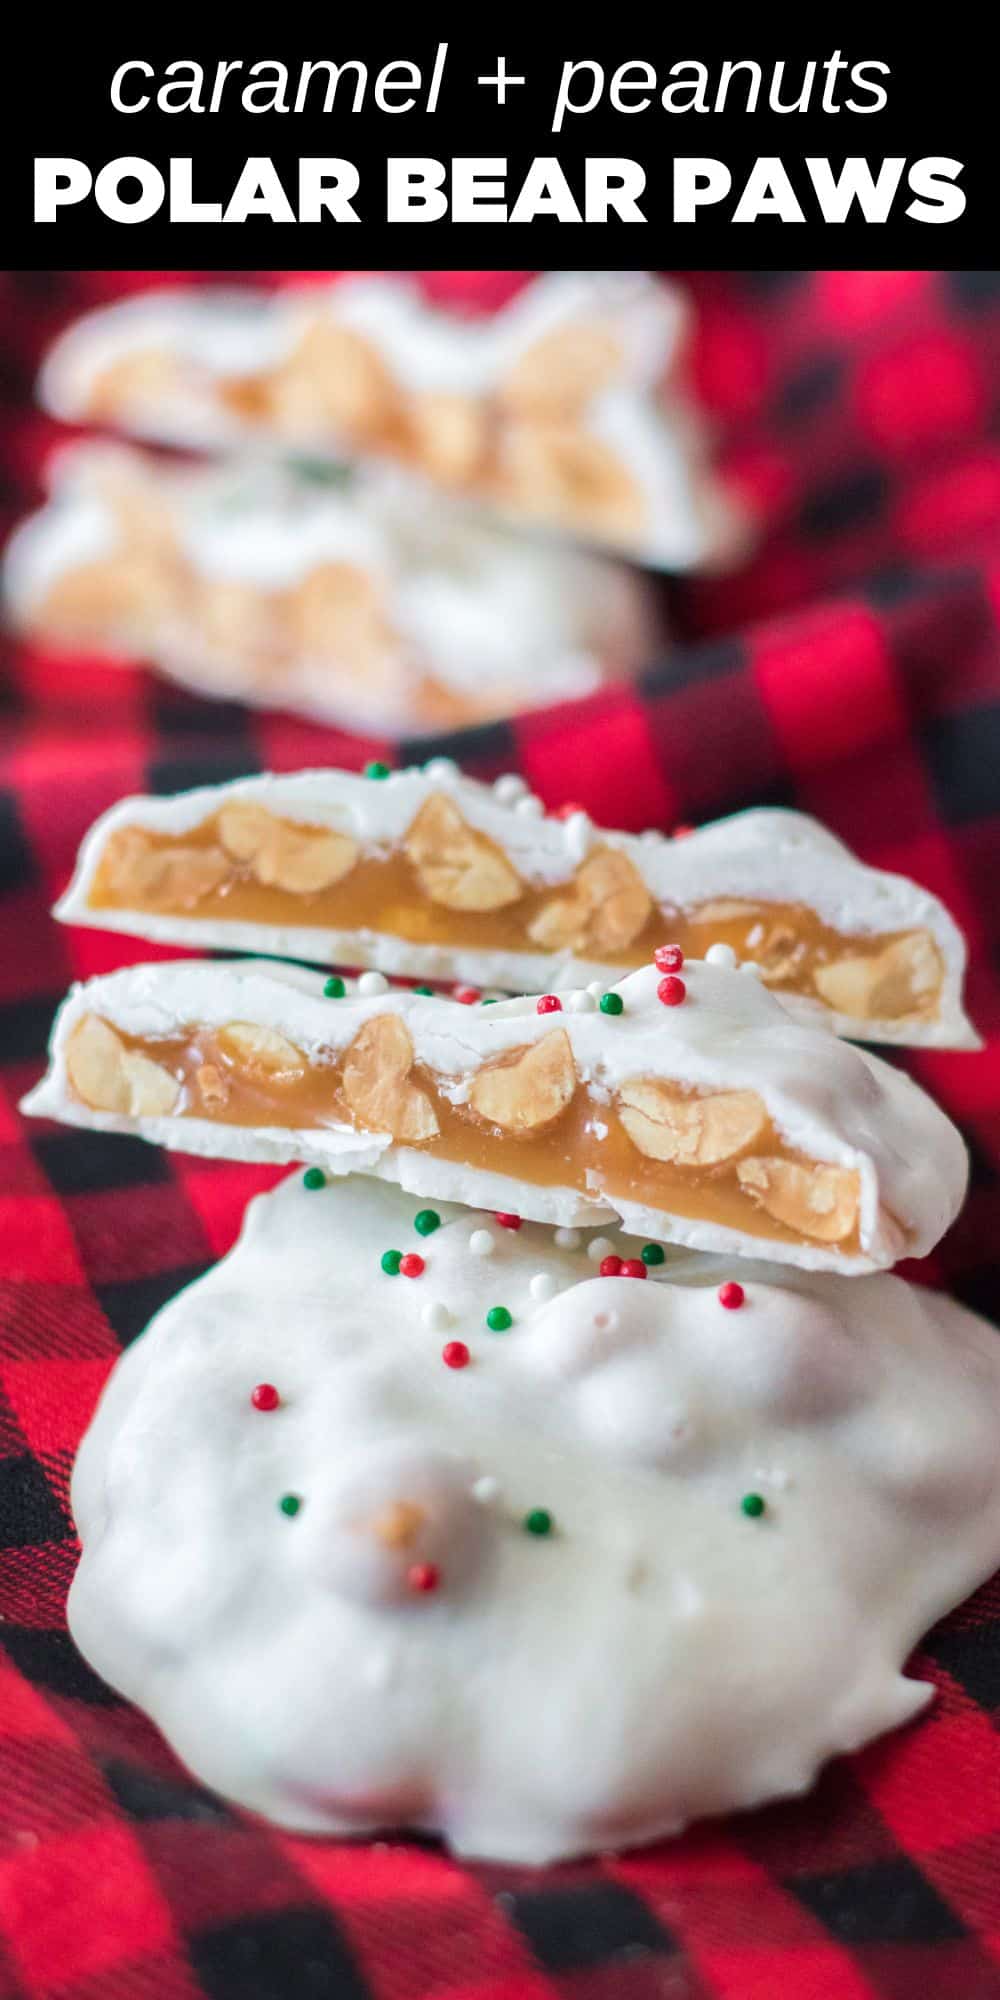 These polar bear claws are a tasty holiday season treat that everyone will love. A delicious candy with creamy and buttery caramel, salty peanuts, and a sweet white chocolate coating, this decadent dessert will be your new favorite holiday recipe.